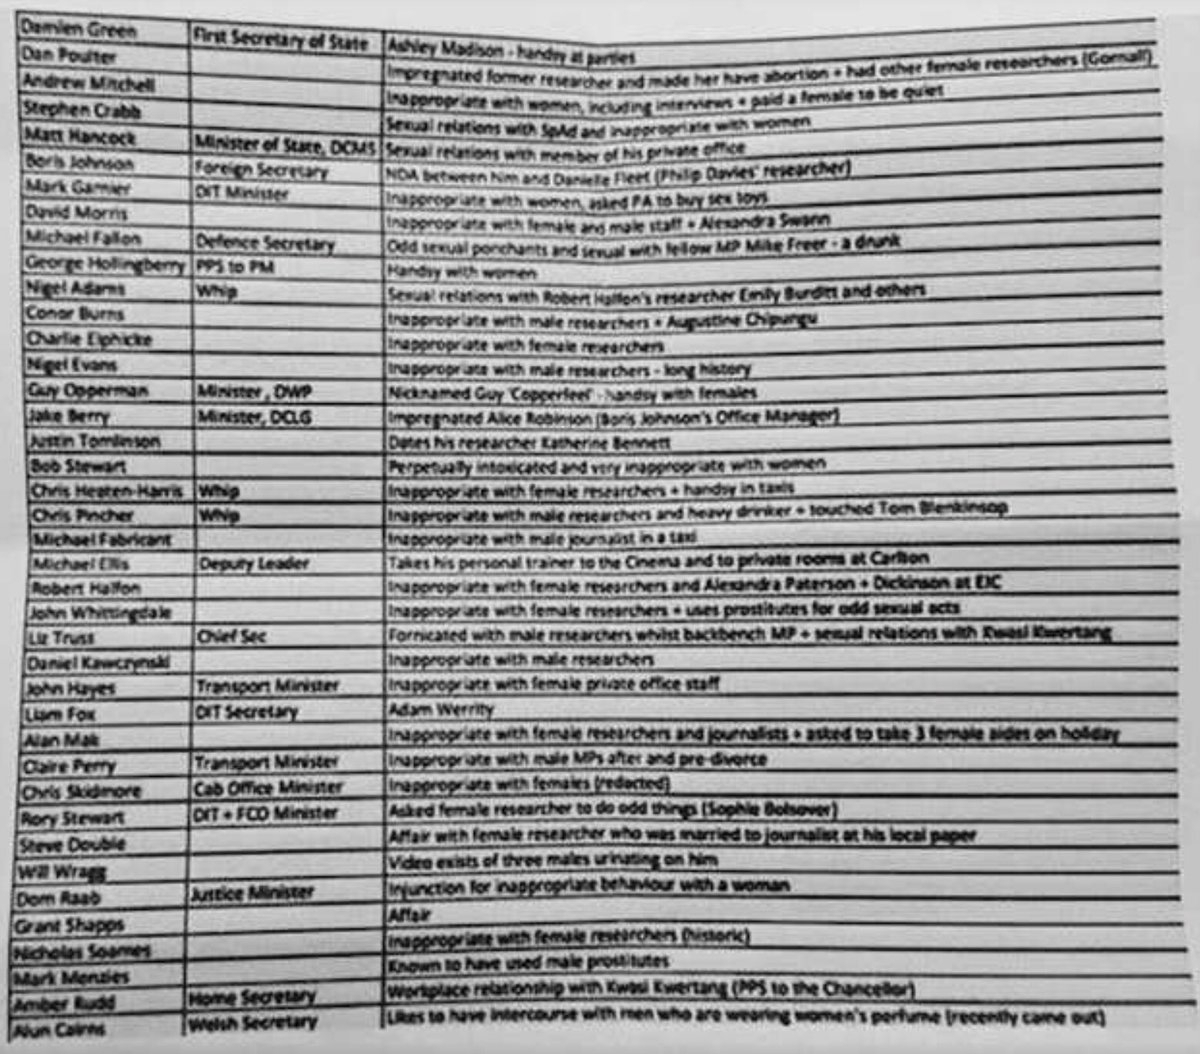 Tory Spreadsheet pertaining to Tom Pride On Twitter: &quot;the Unredacted Spreadsheet Of 40 Tory Mps